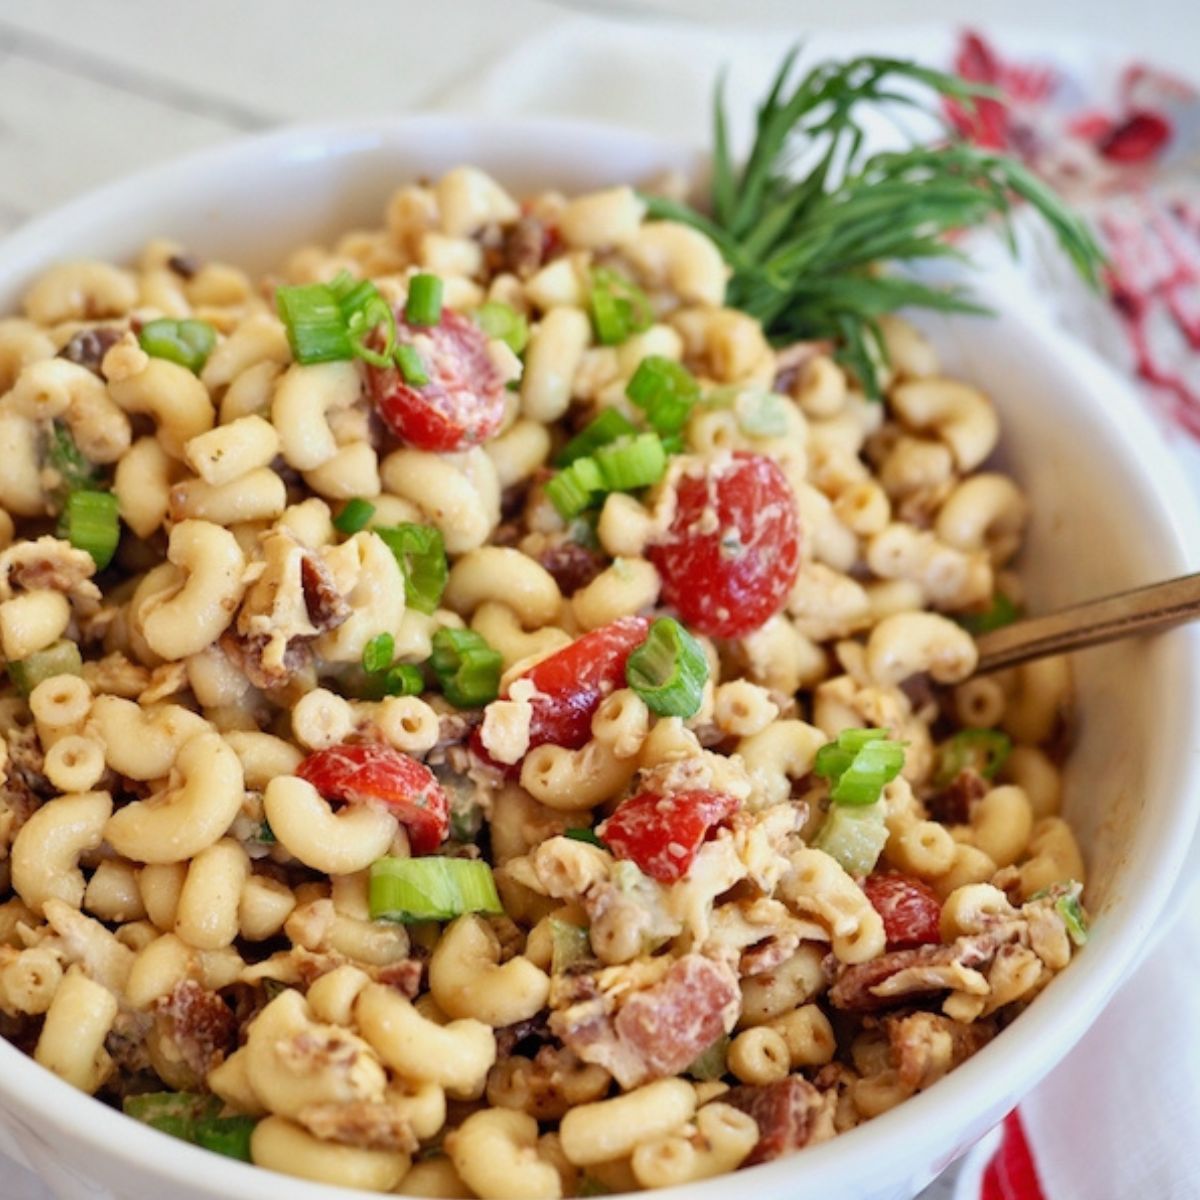 Bacon macaroni salad in a pretty white ceramic bowl garnished with fresh dill.